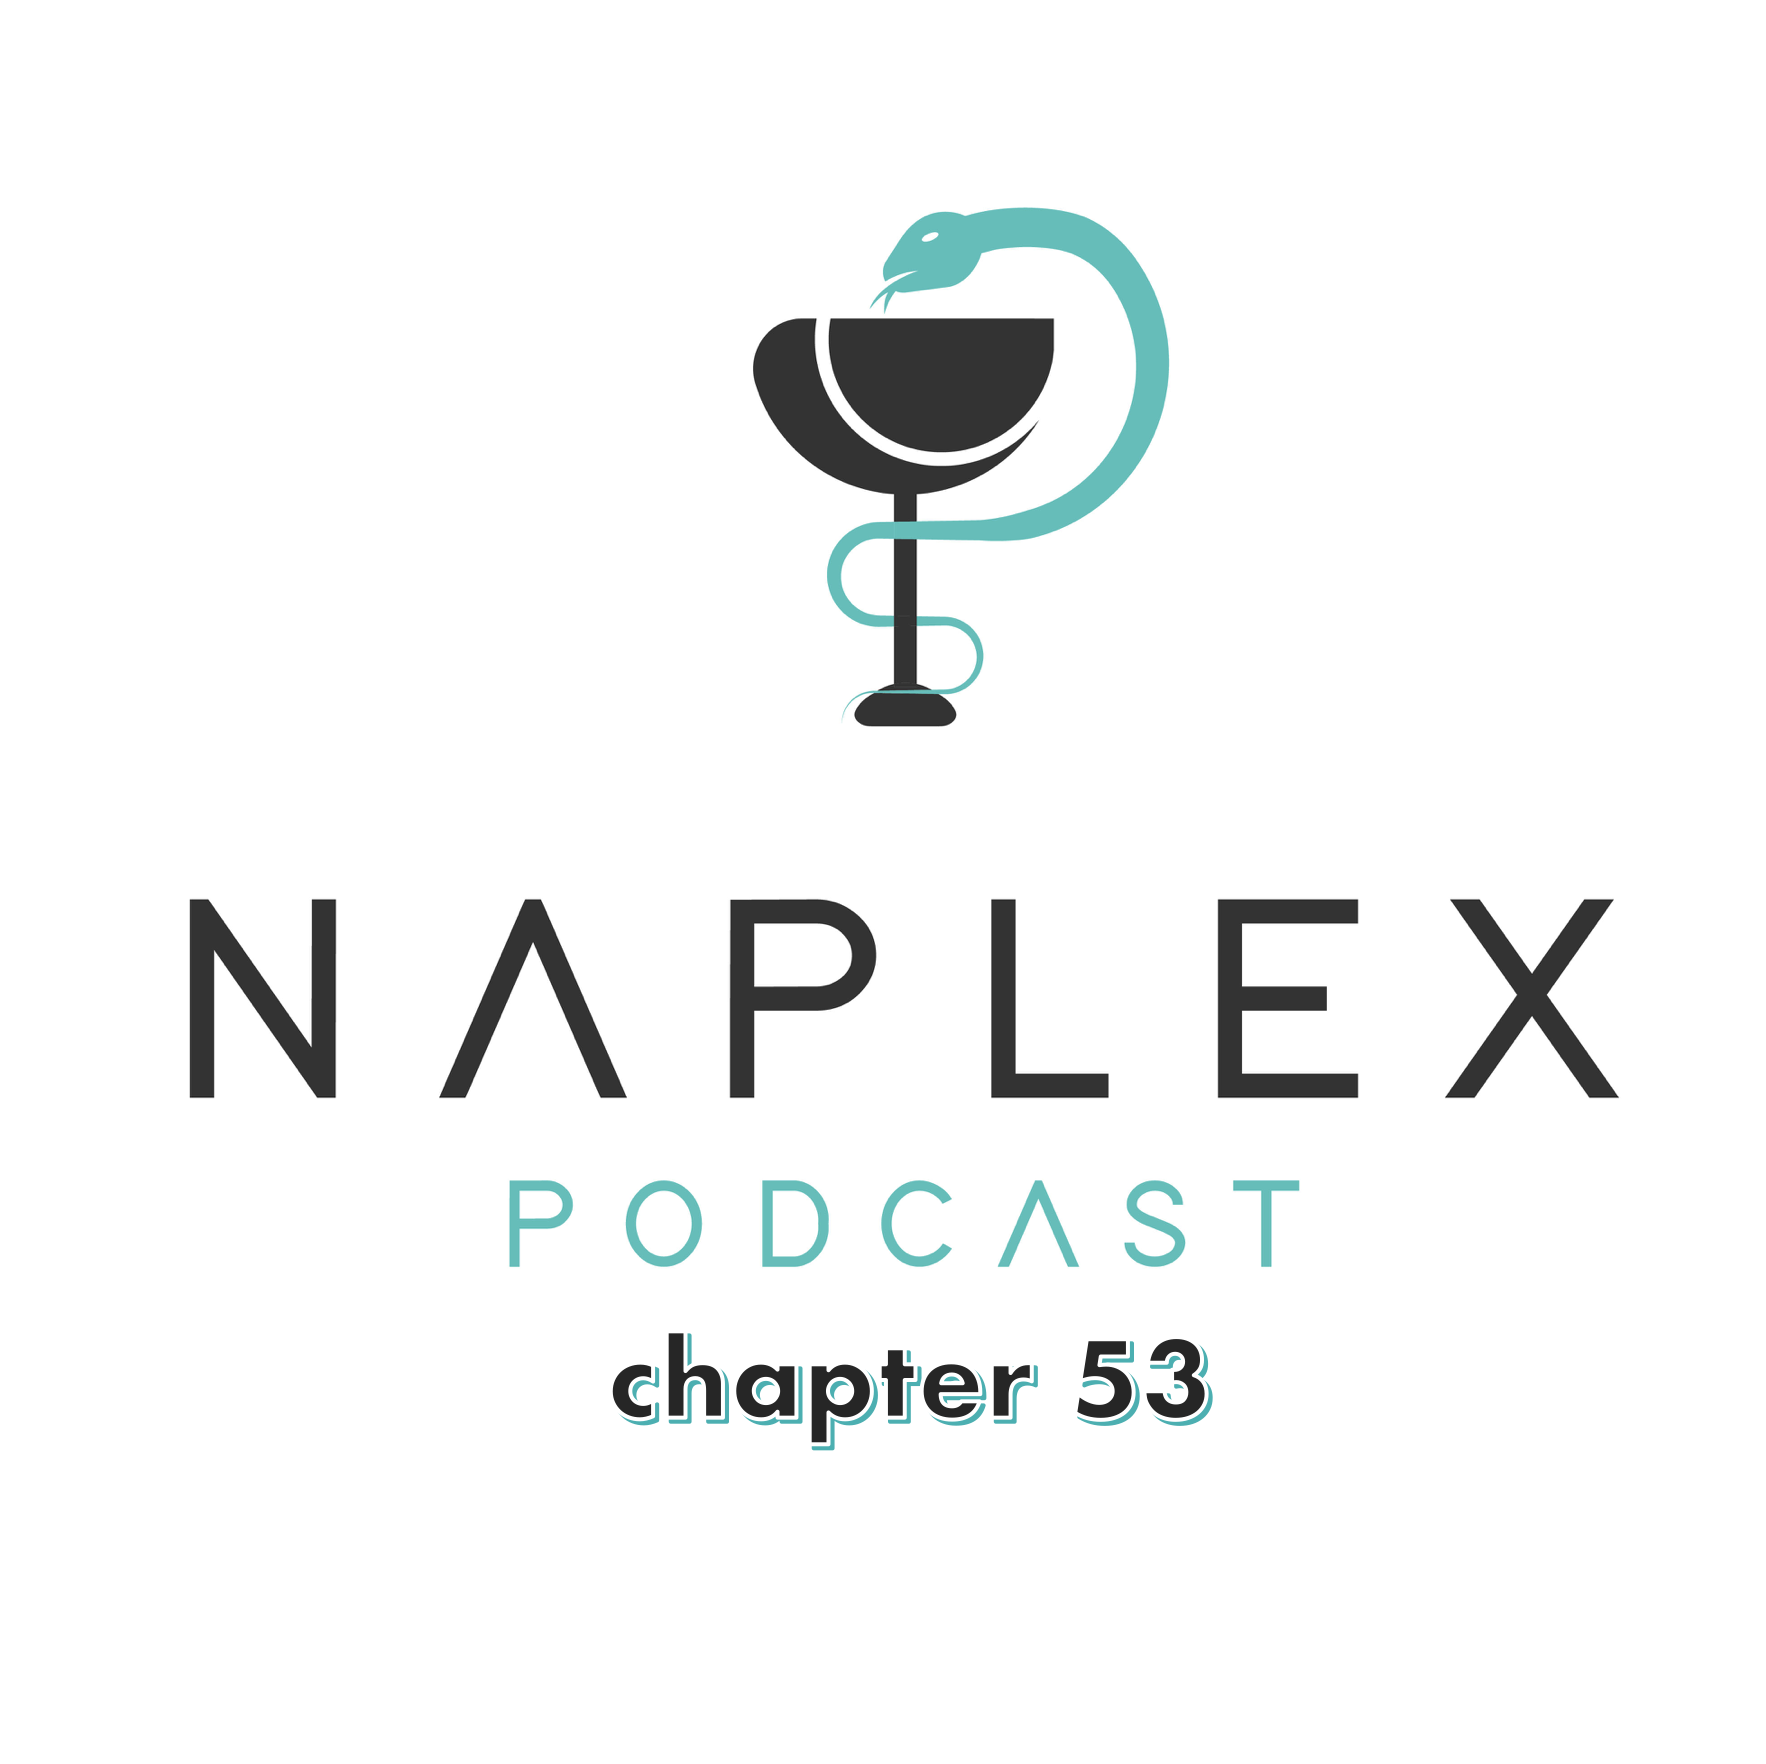 Naplex Podcast | Chapter 53: Anxiety Disorders